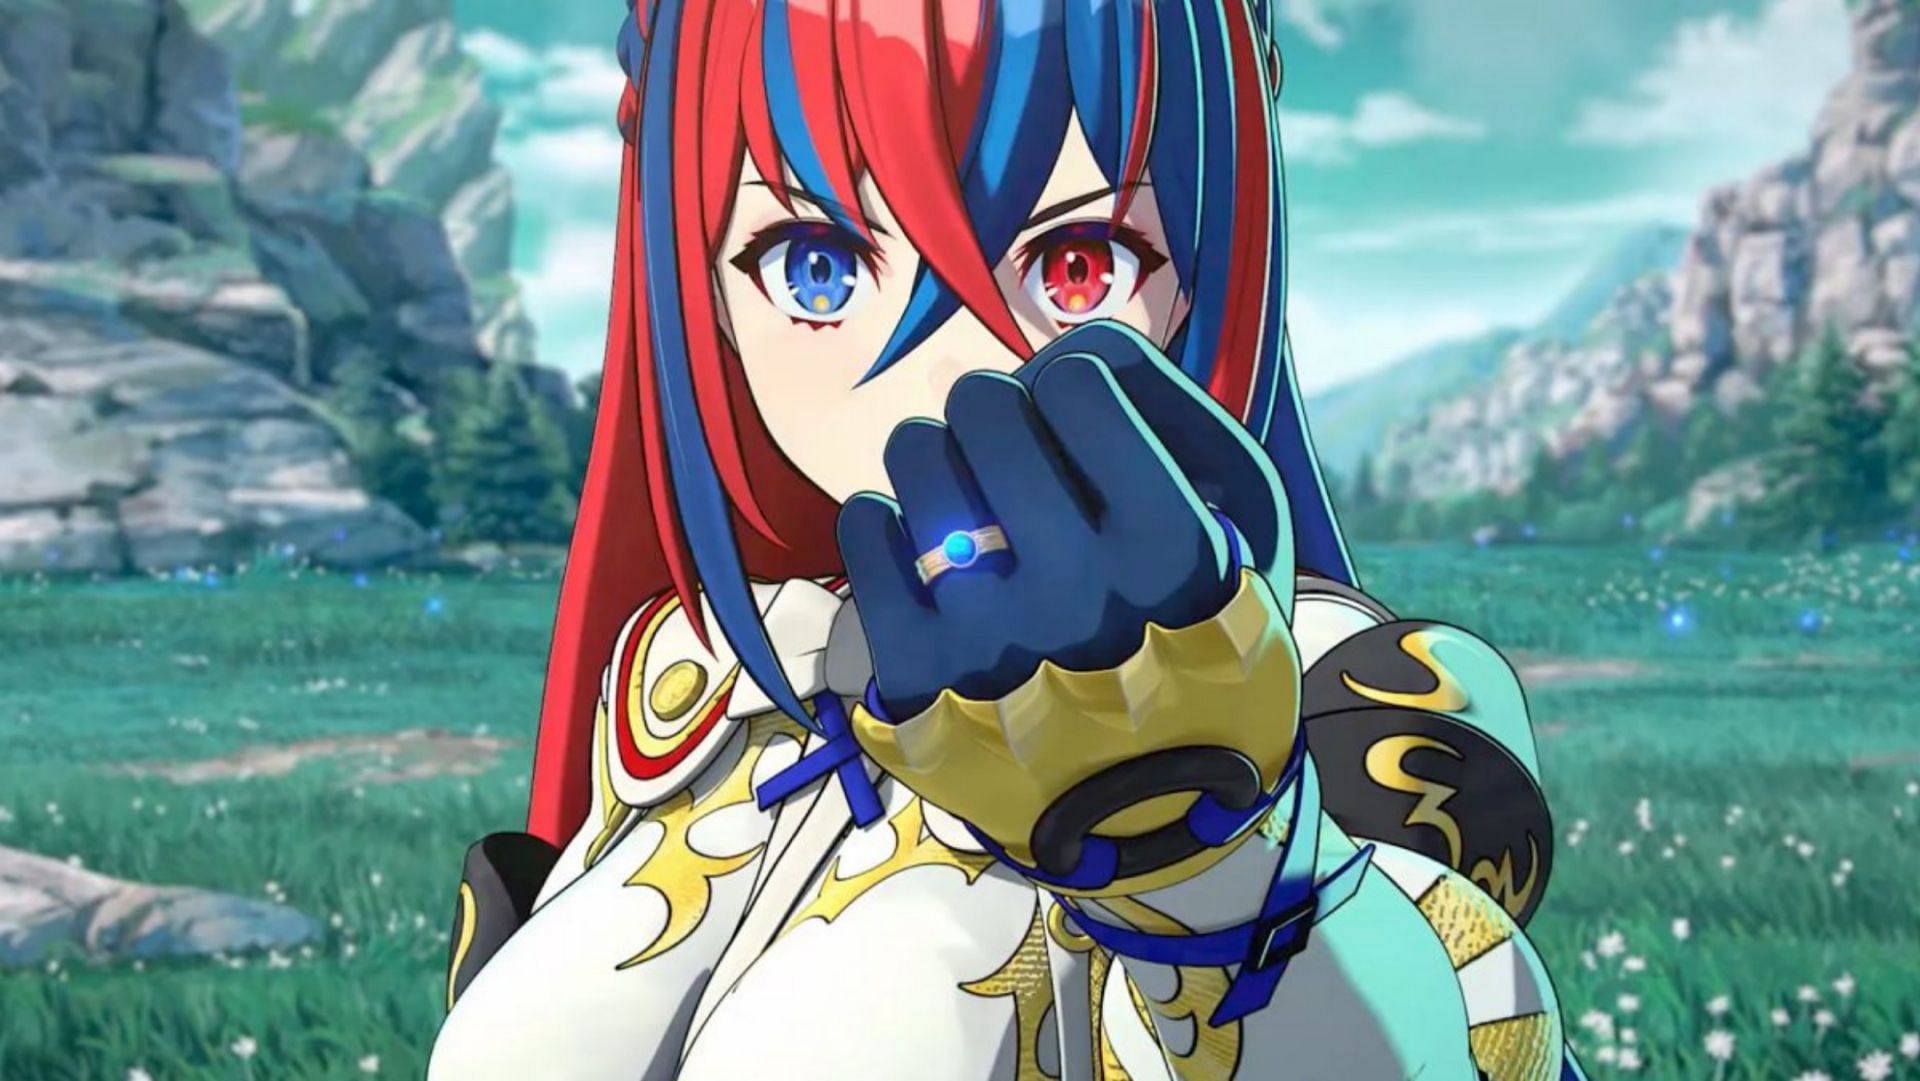 Fire Emblem Engage brings some incredible gameplay back to the franchise.